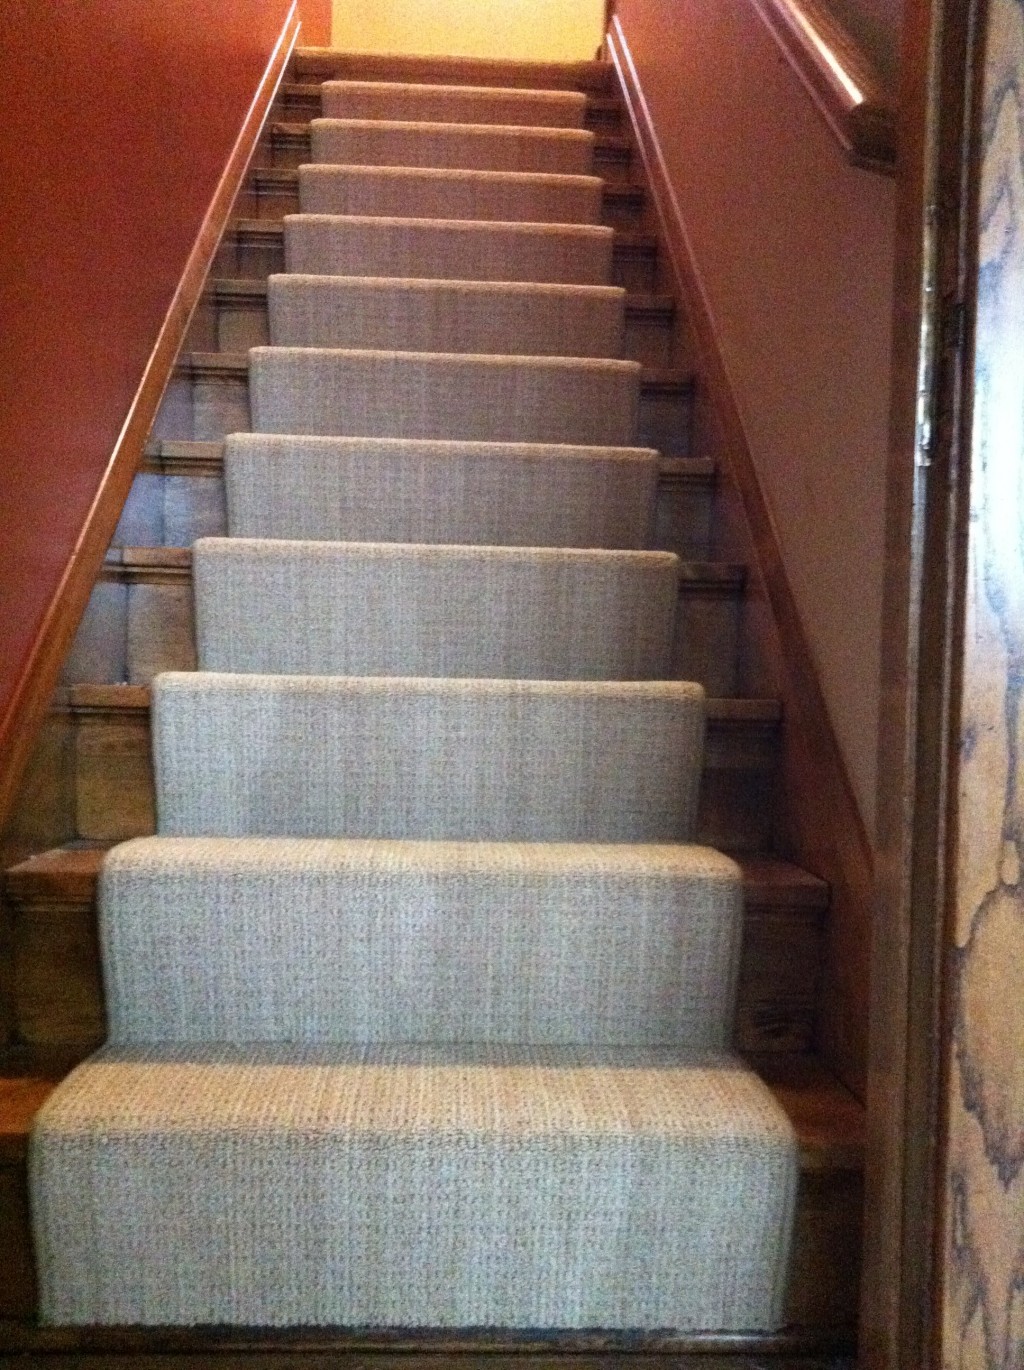 carpet runners for stairs modern photo - 4